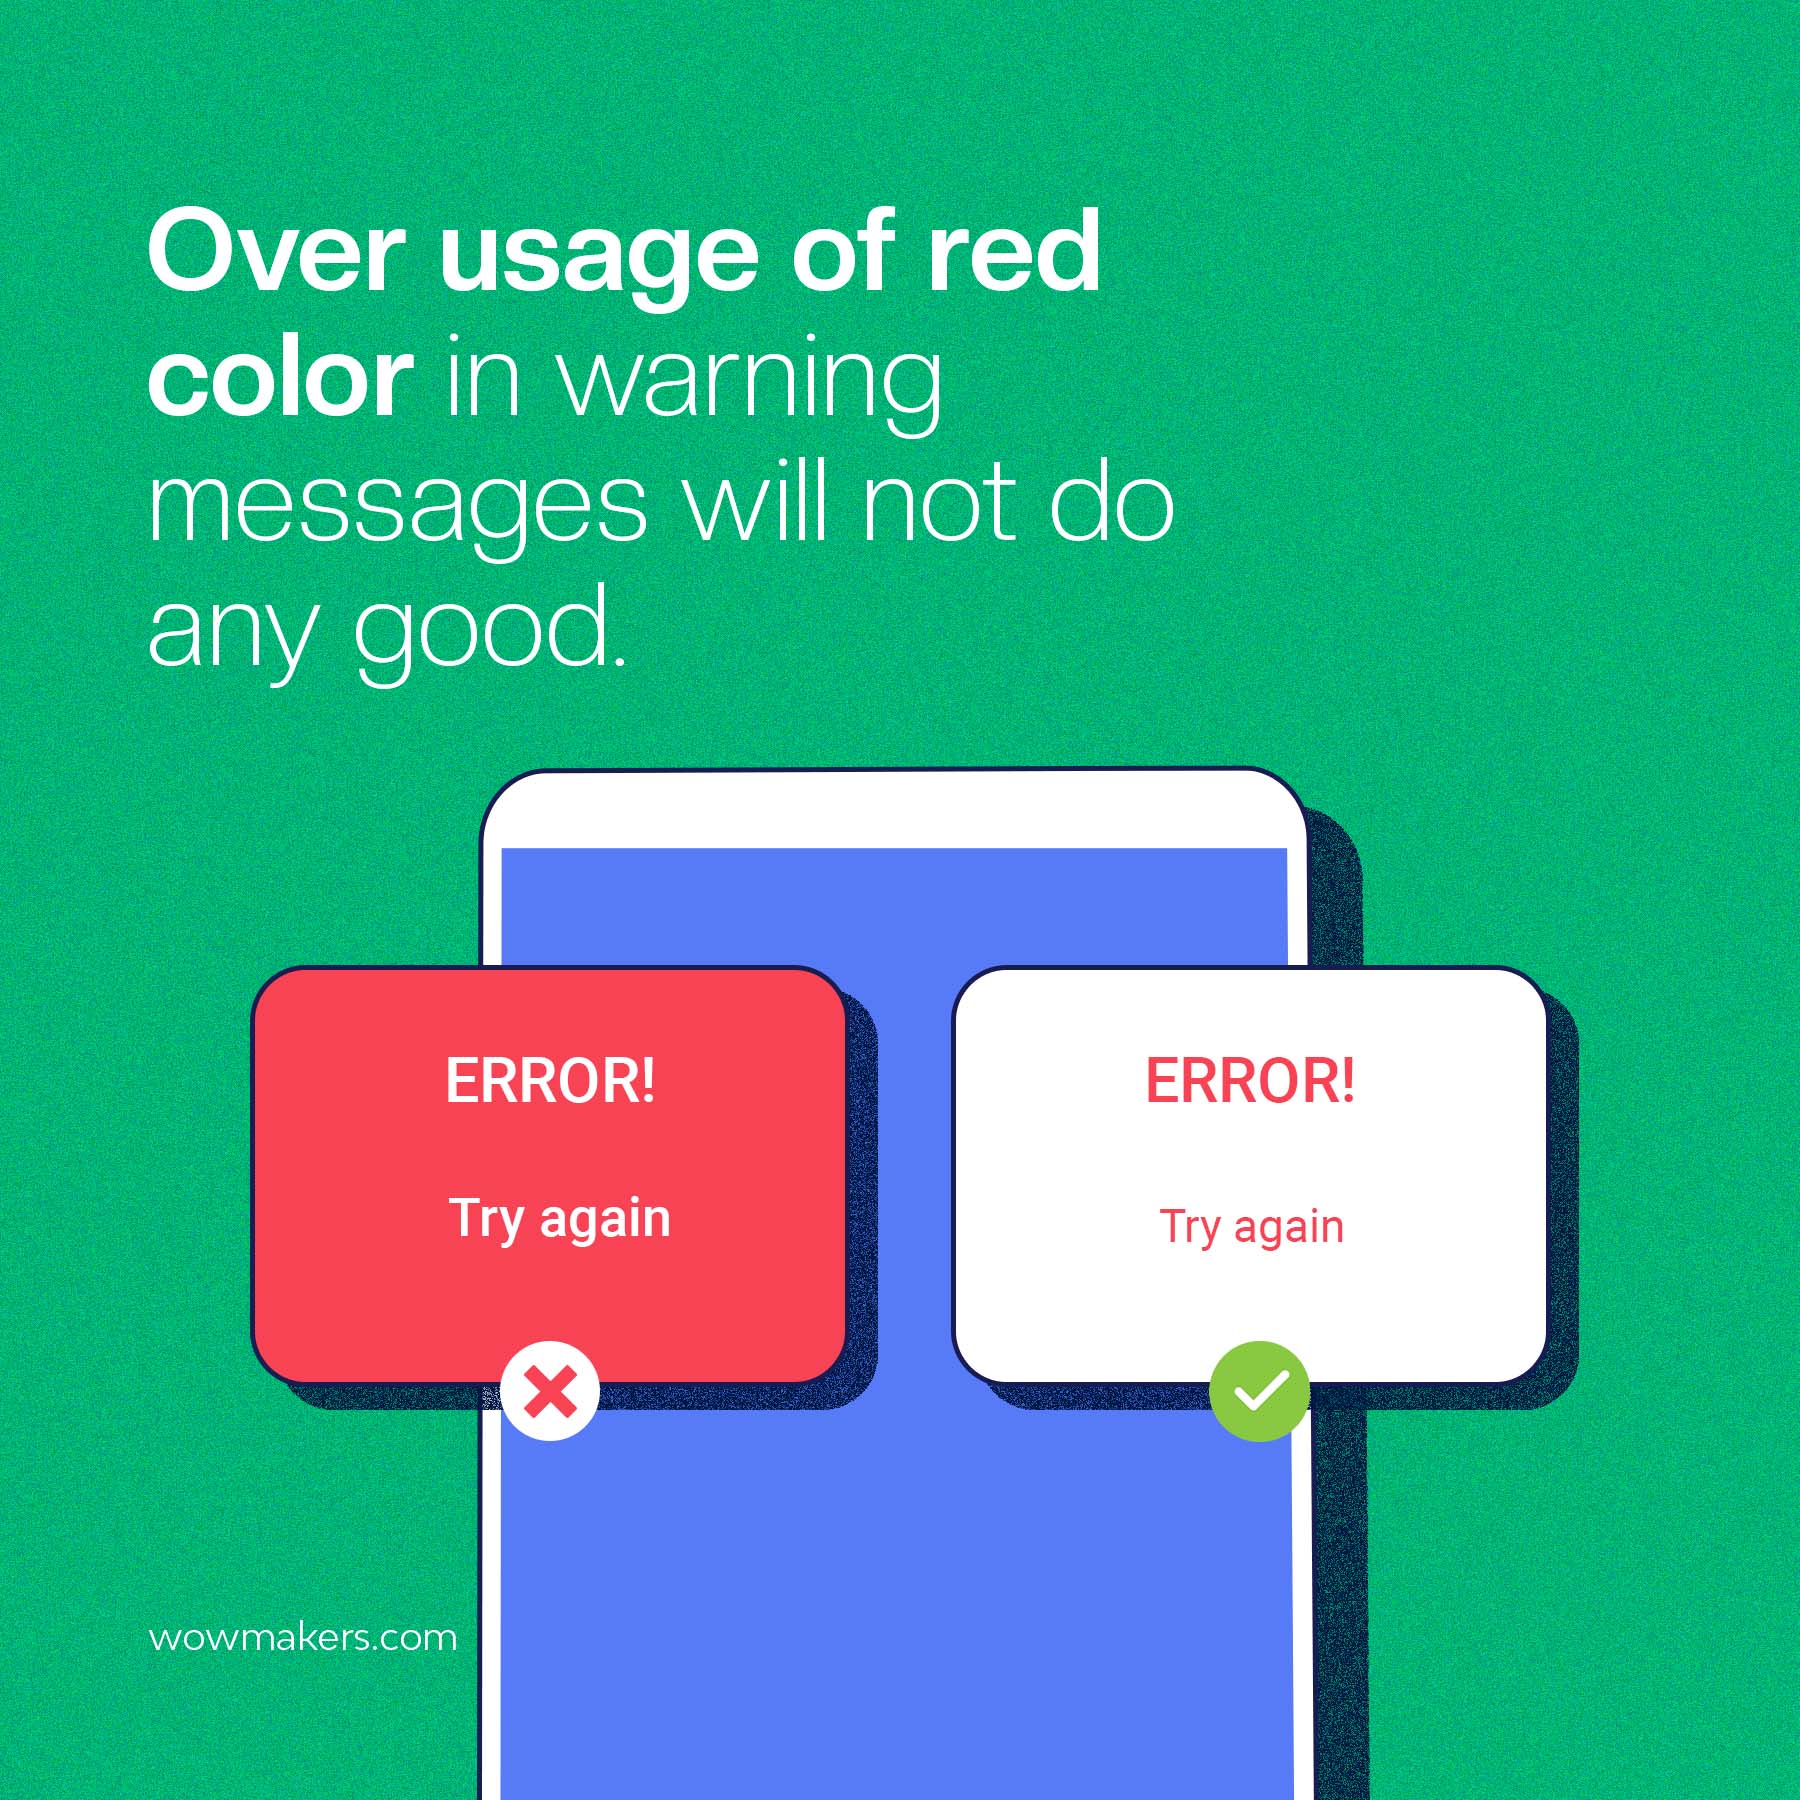 user friendly error messages - limit use of red